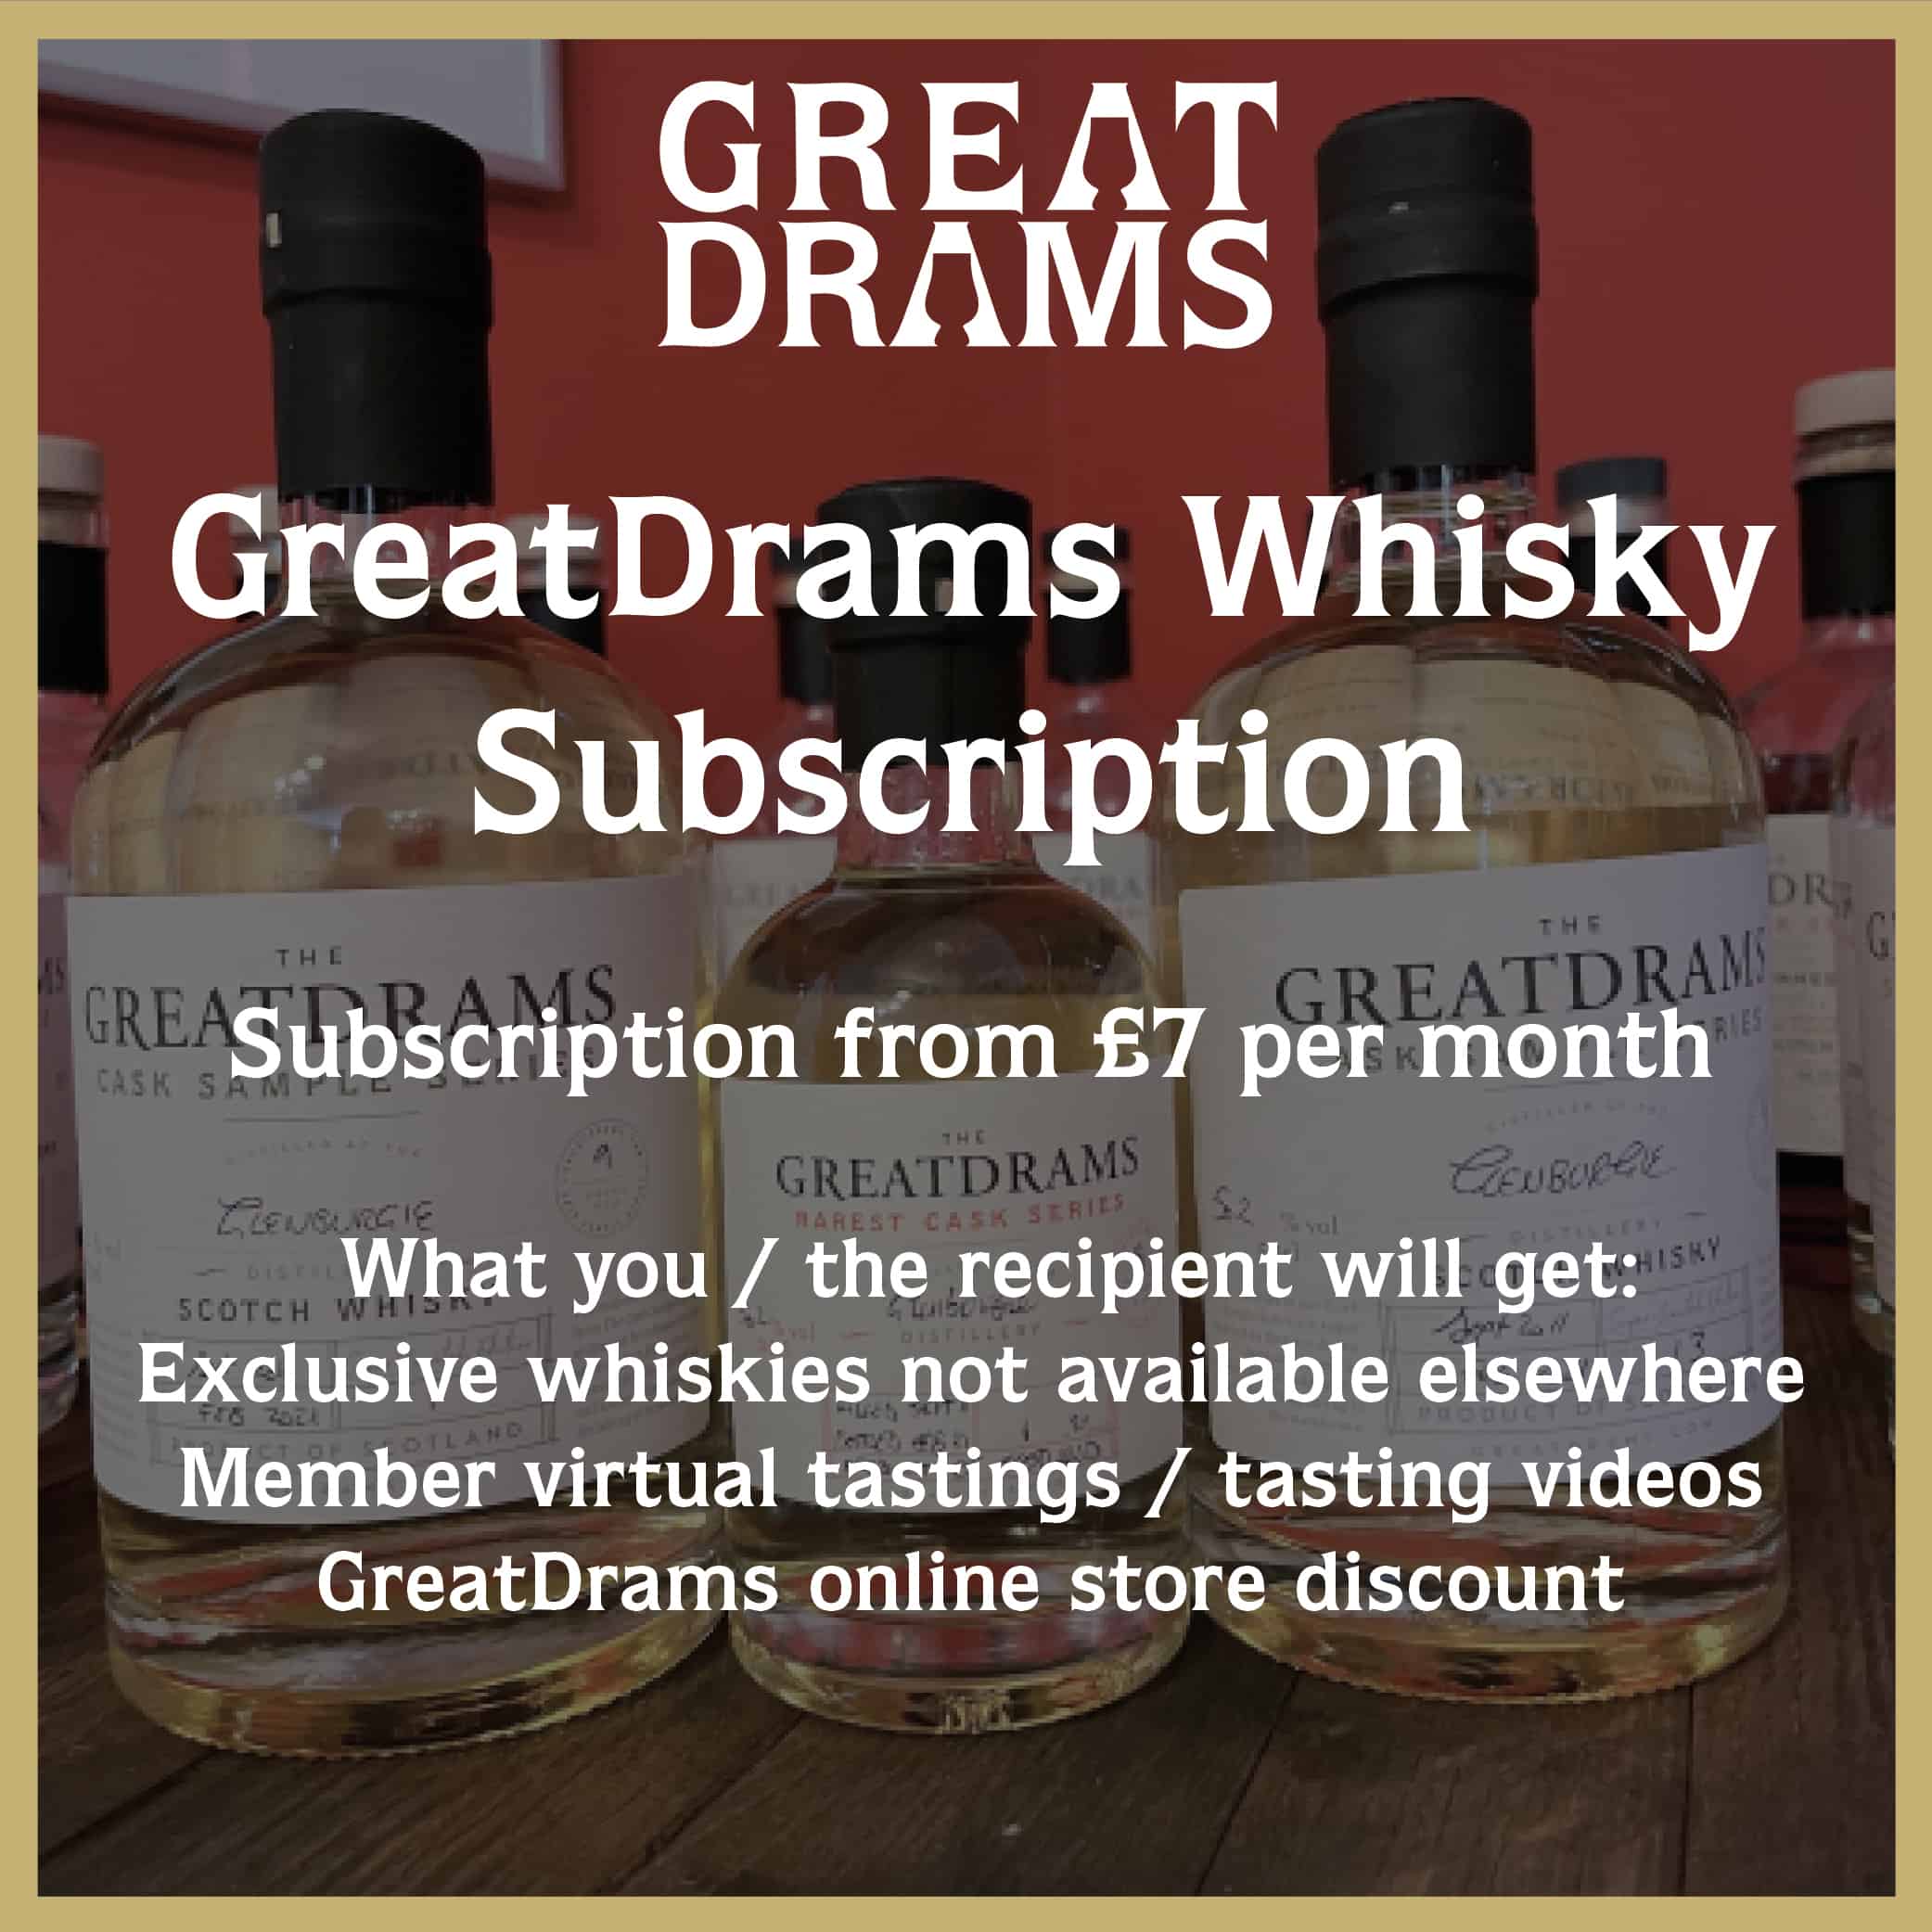 MASTER OF MALT LAUNCHES WHISKY SUBSCRIPTION CLUB - Cocktails Distilled